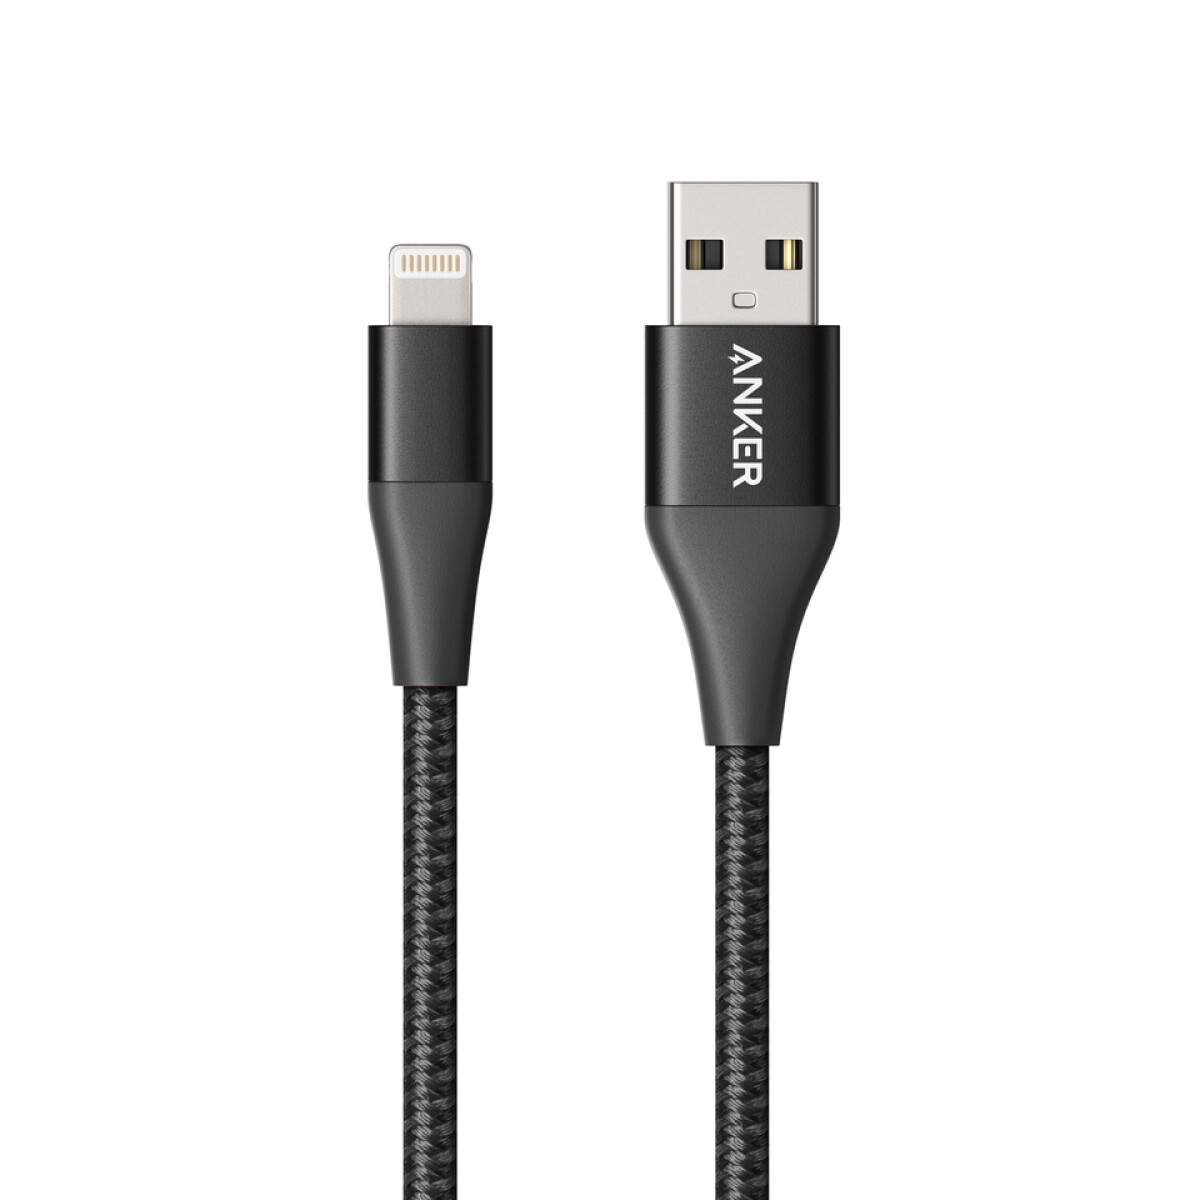 Anker powerline+ cable braided with lightning connector 3ft 0.9m - Anker powerline+ cable braided with lightning connector 3ft 0.9m bl 